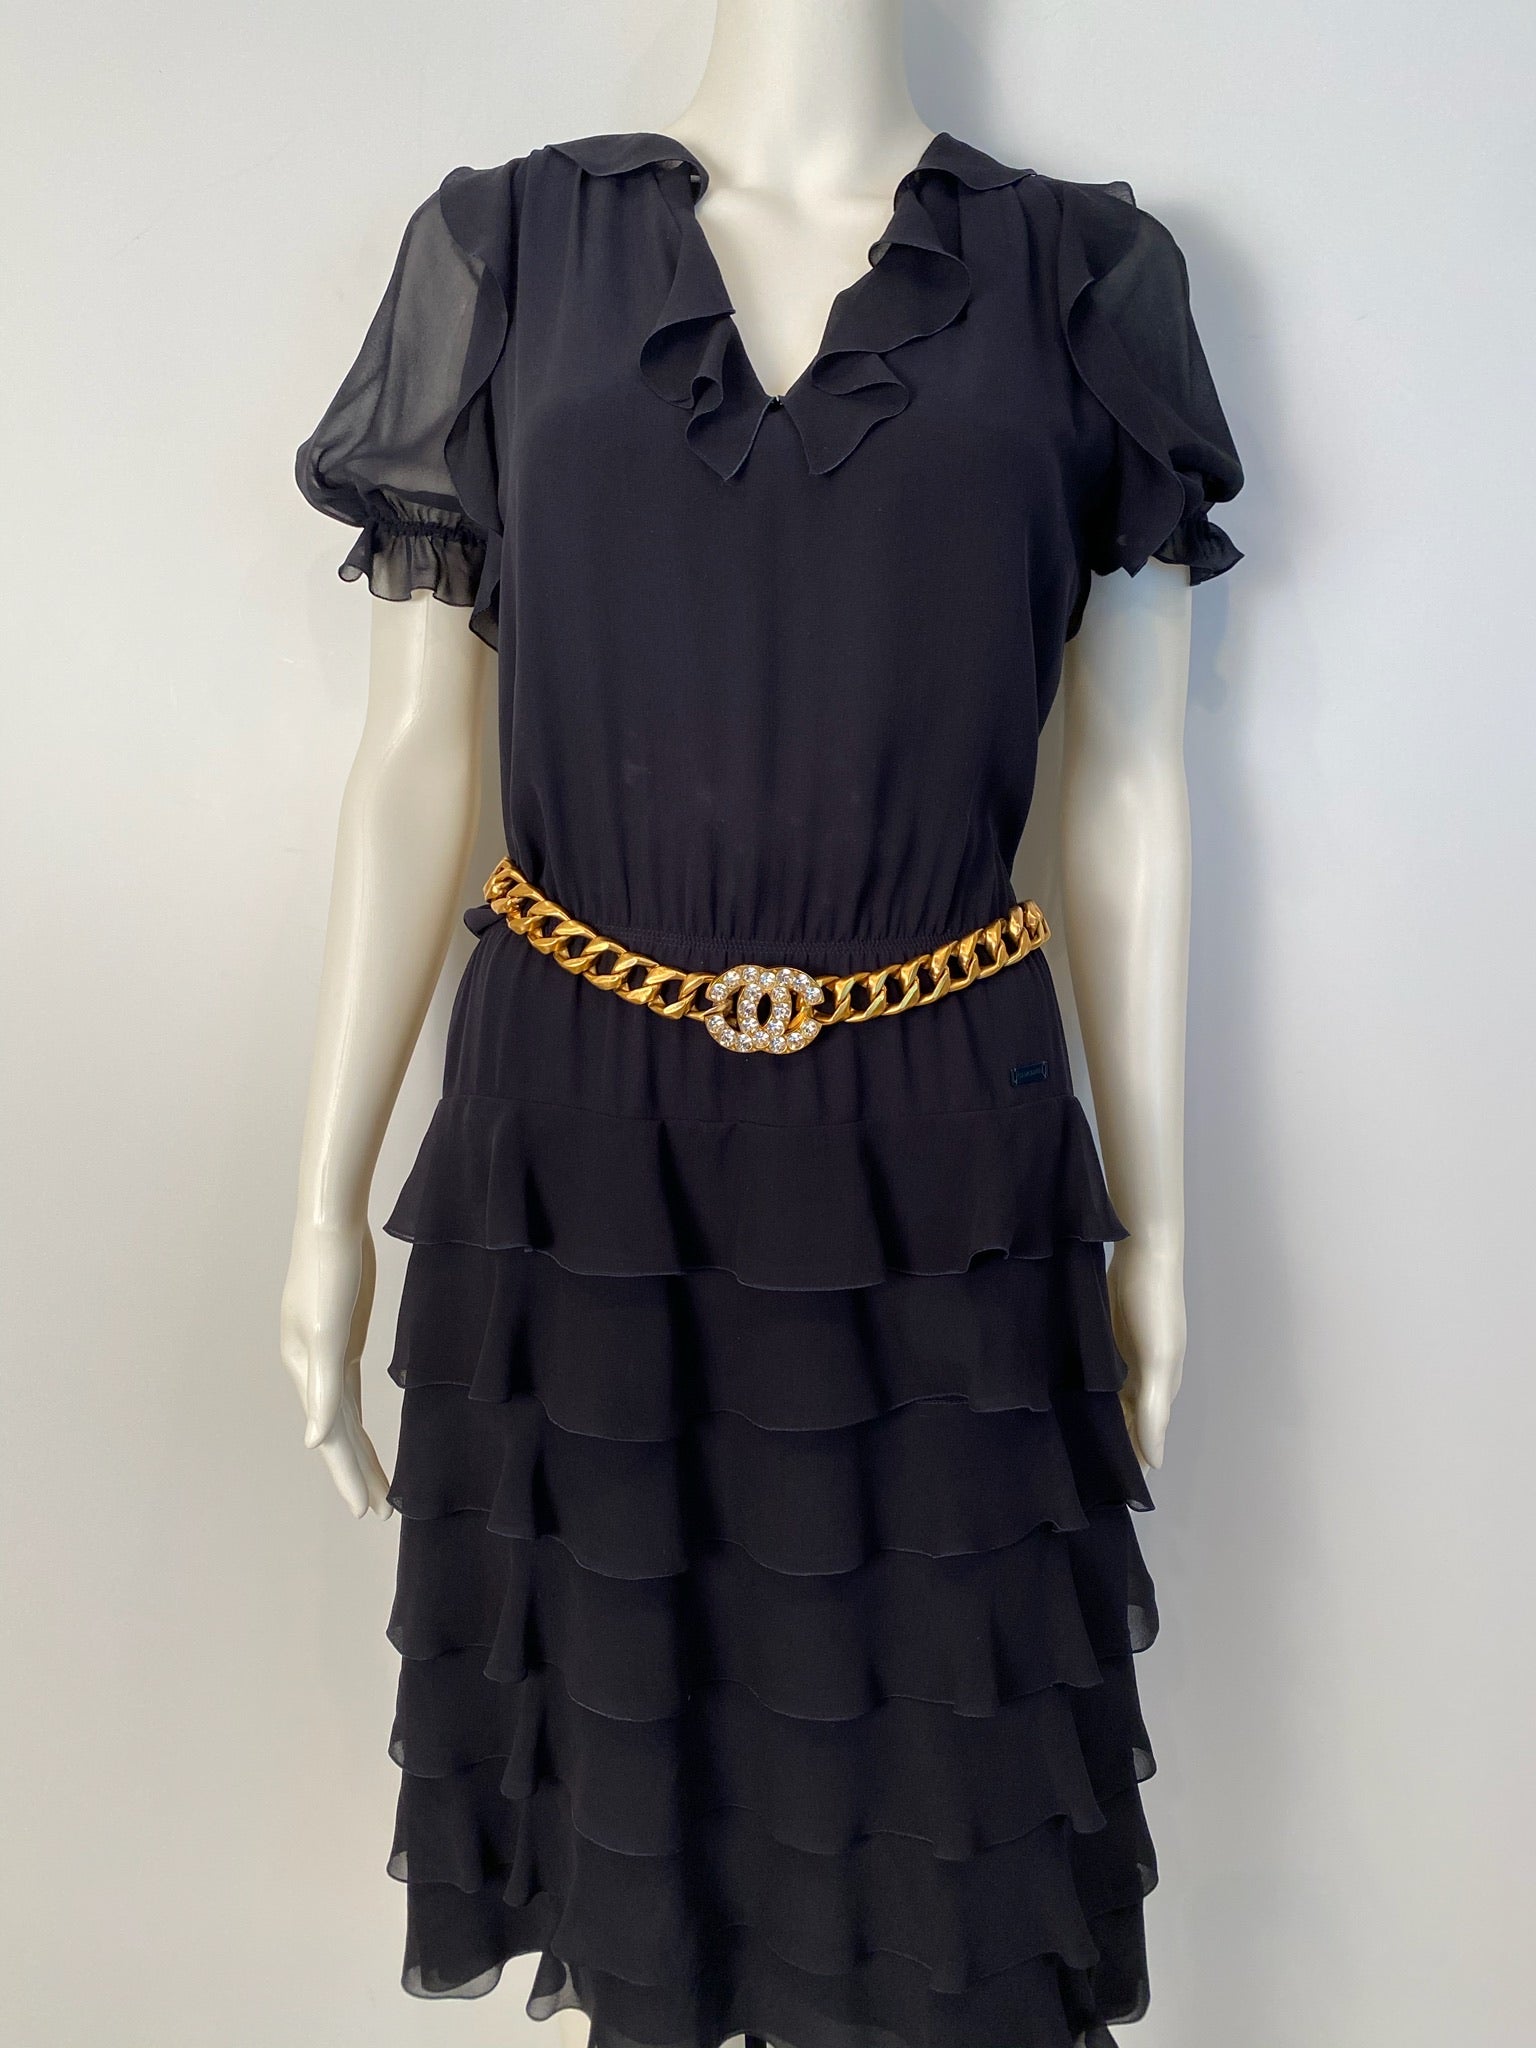 new chanel boutique dress